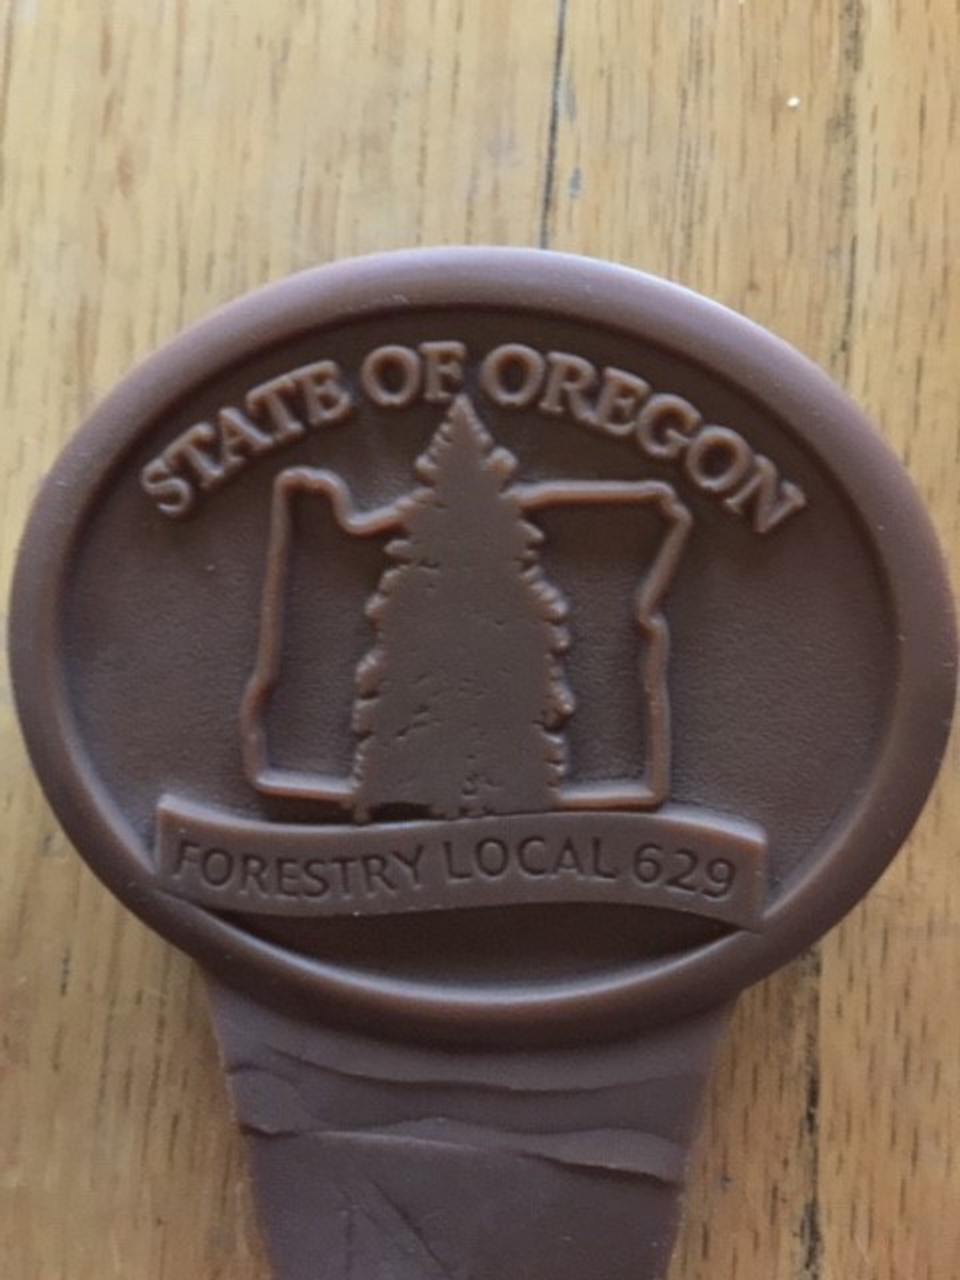 State of Oregon Forestry Local 629 Buckle 